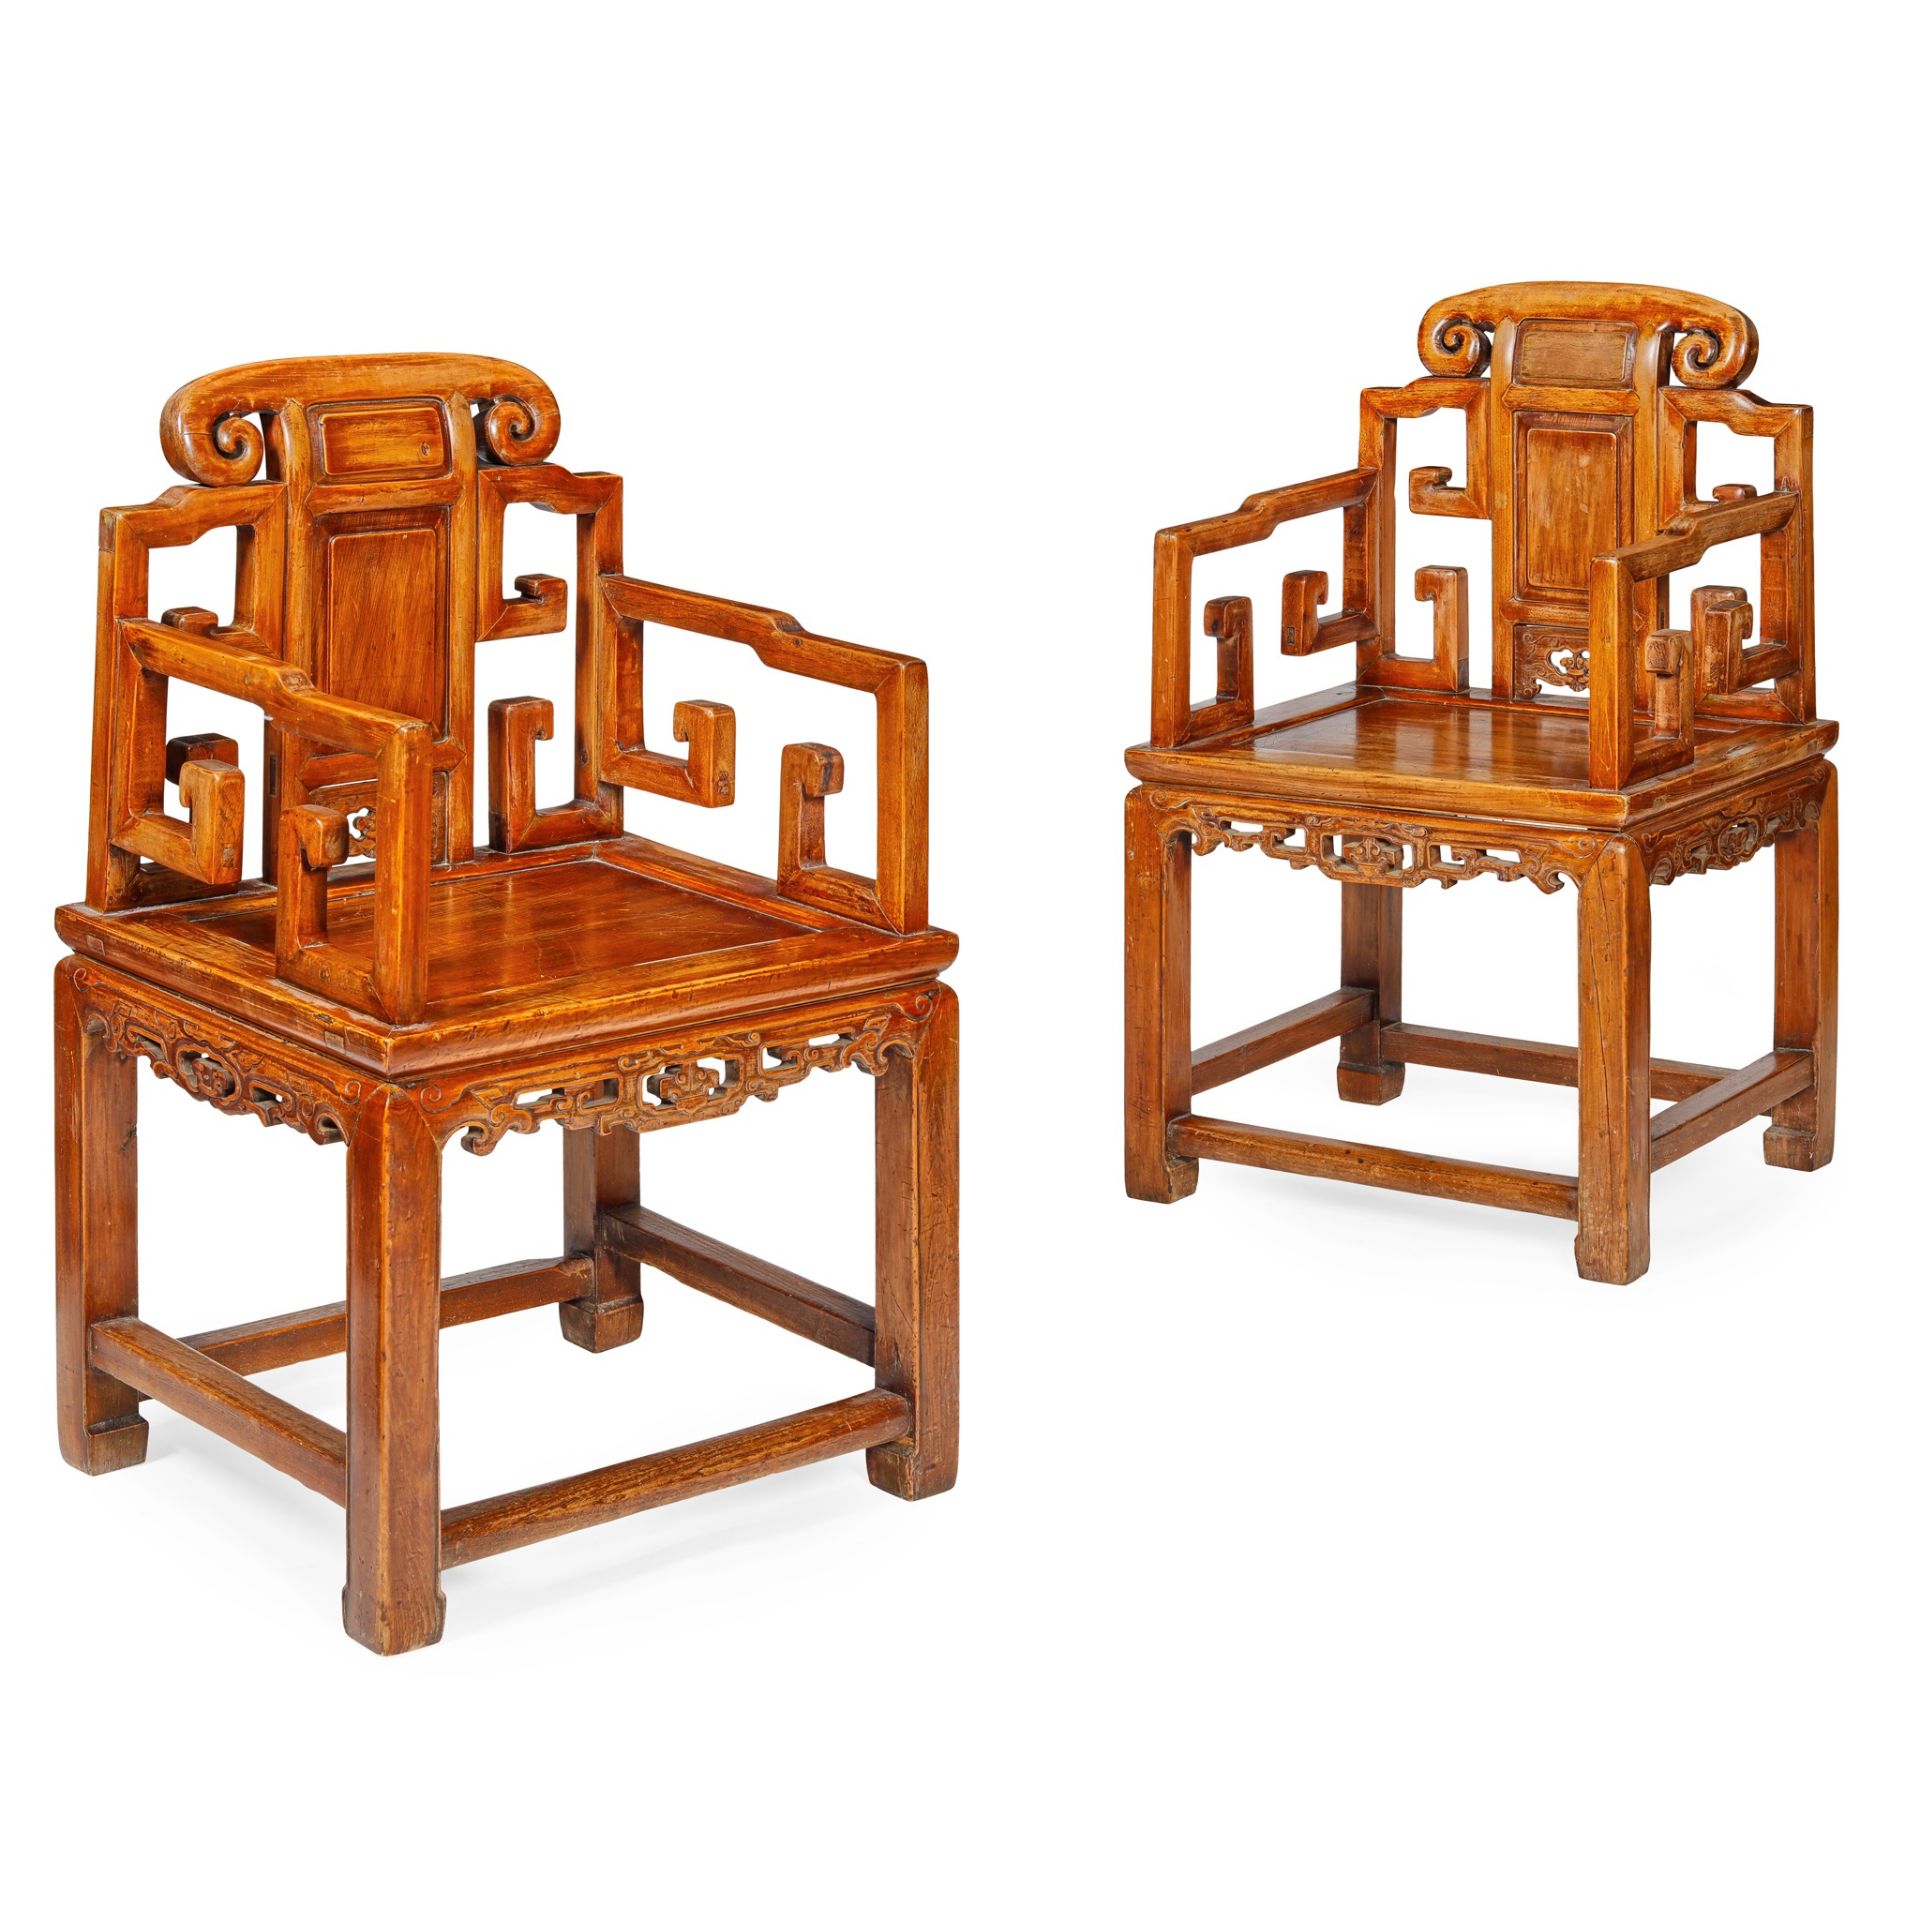 PAIR OF CHINESE SOFTWOOD ARMCHAIRS QING DYNASTY, 19TH CENTURY